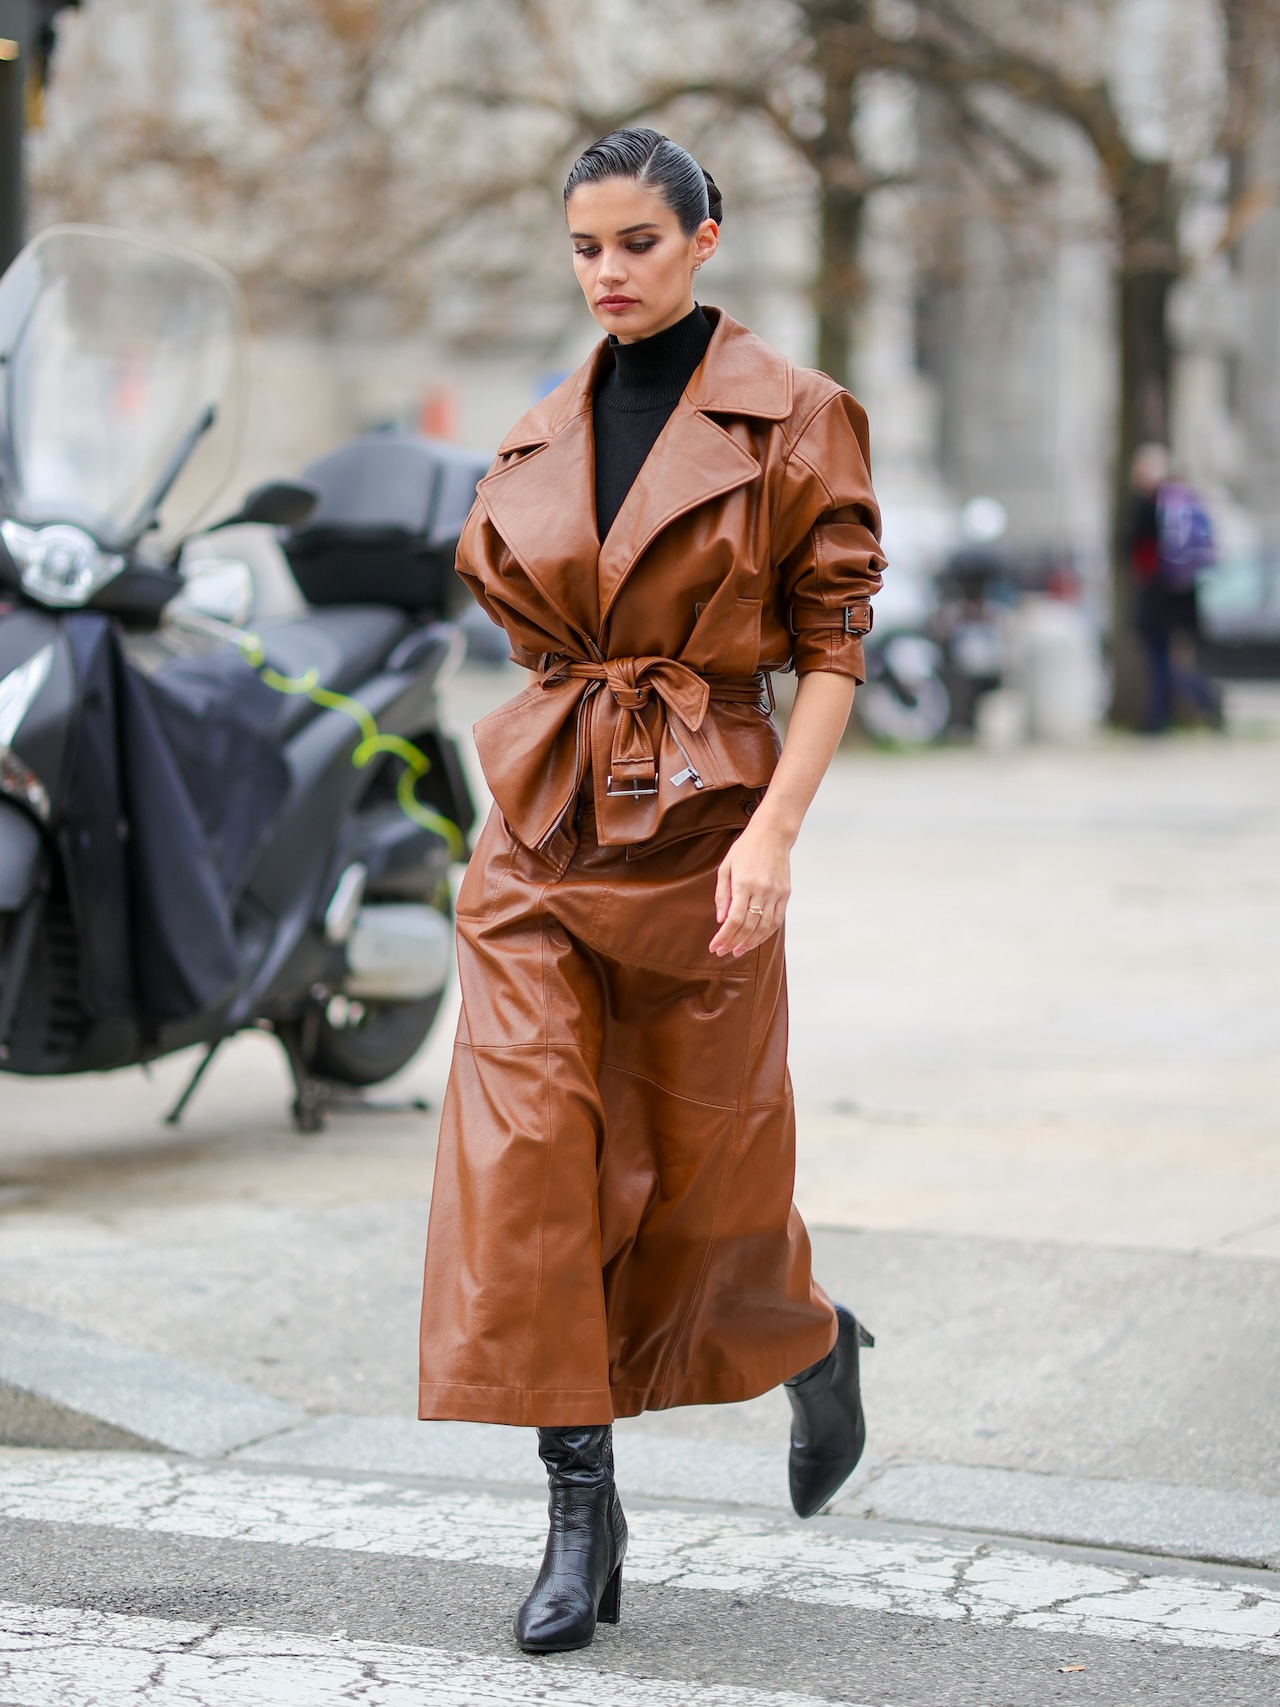 Leather Skirt, Turtleneck, & Heels: The New Classic